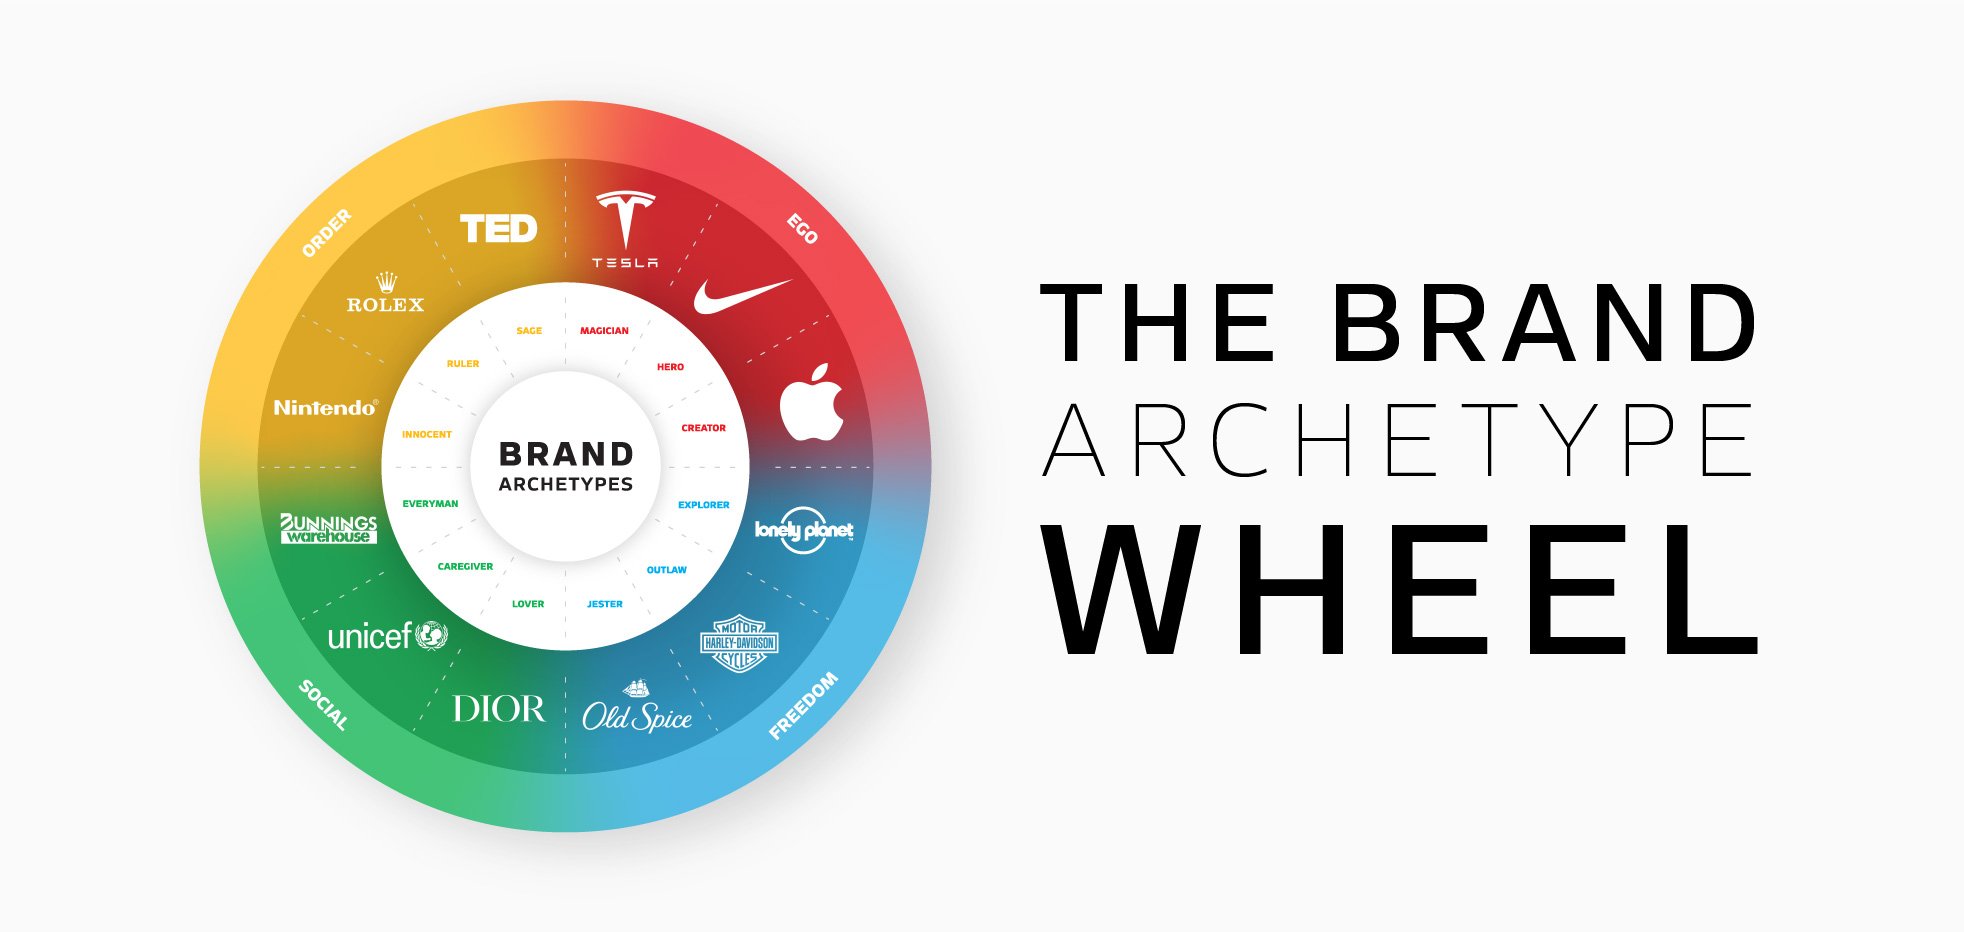 What’s your brand personality?